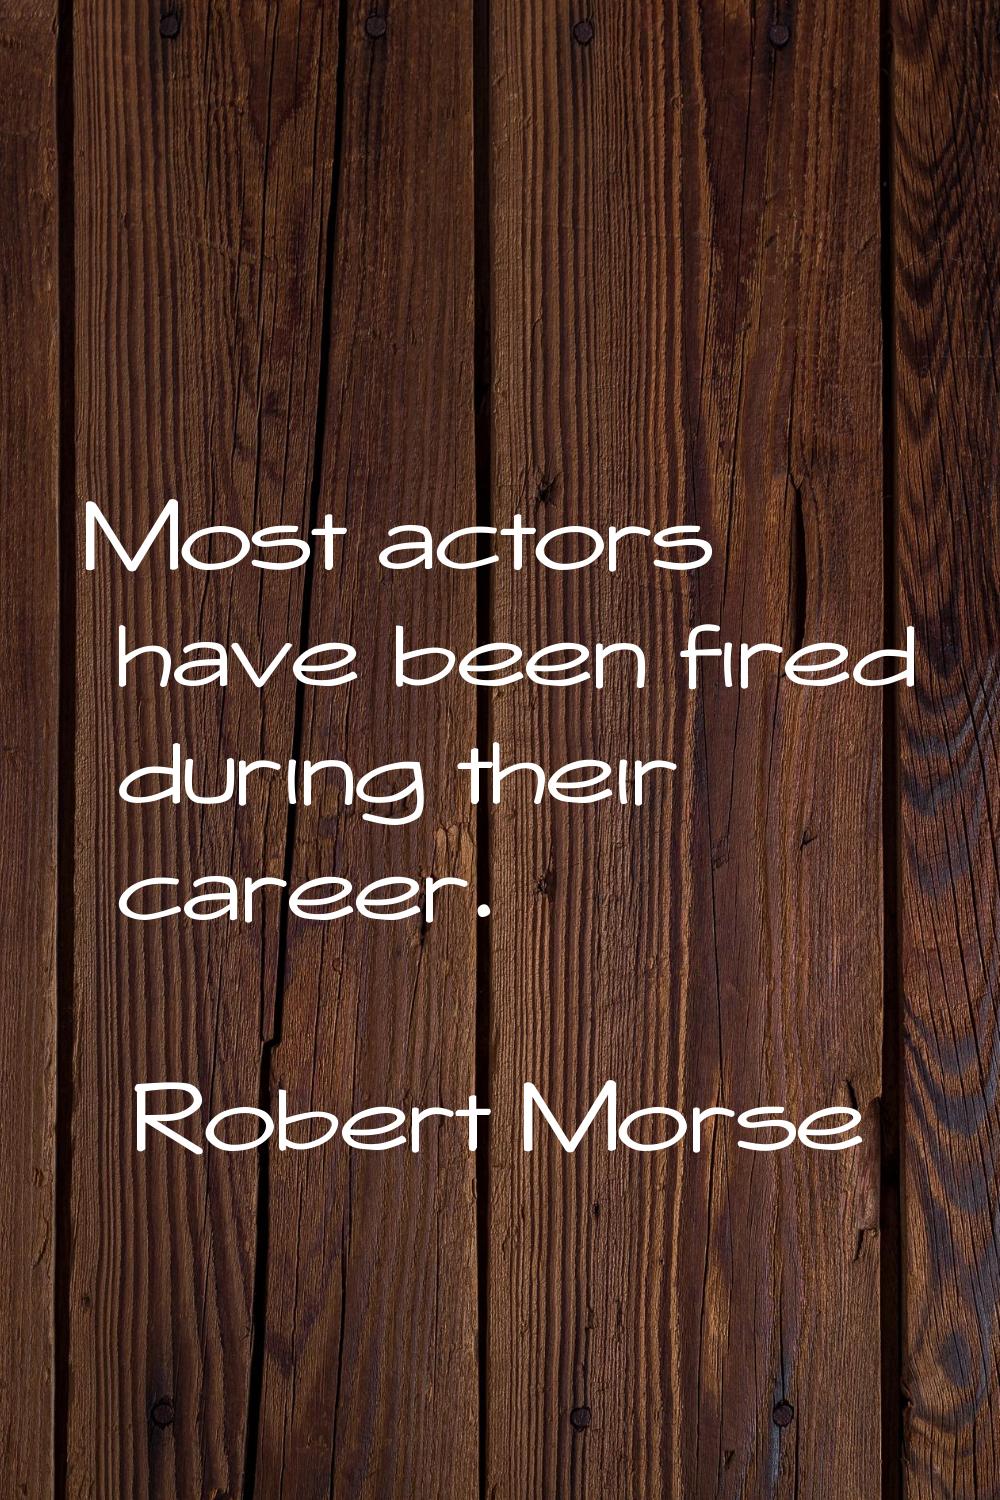 Most actors have been fired during their career.